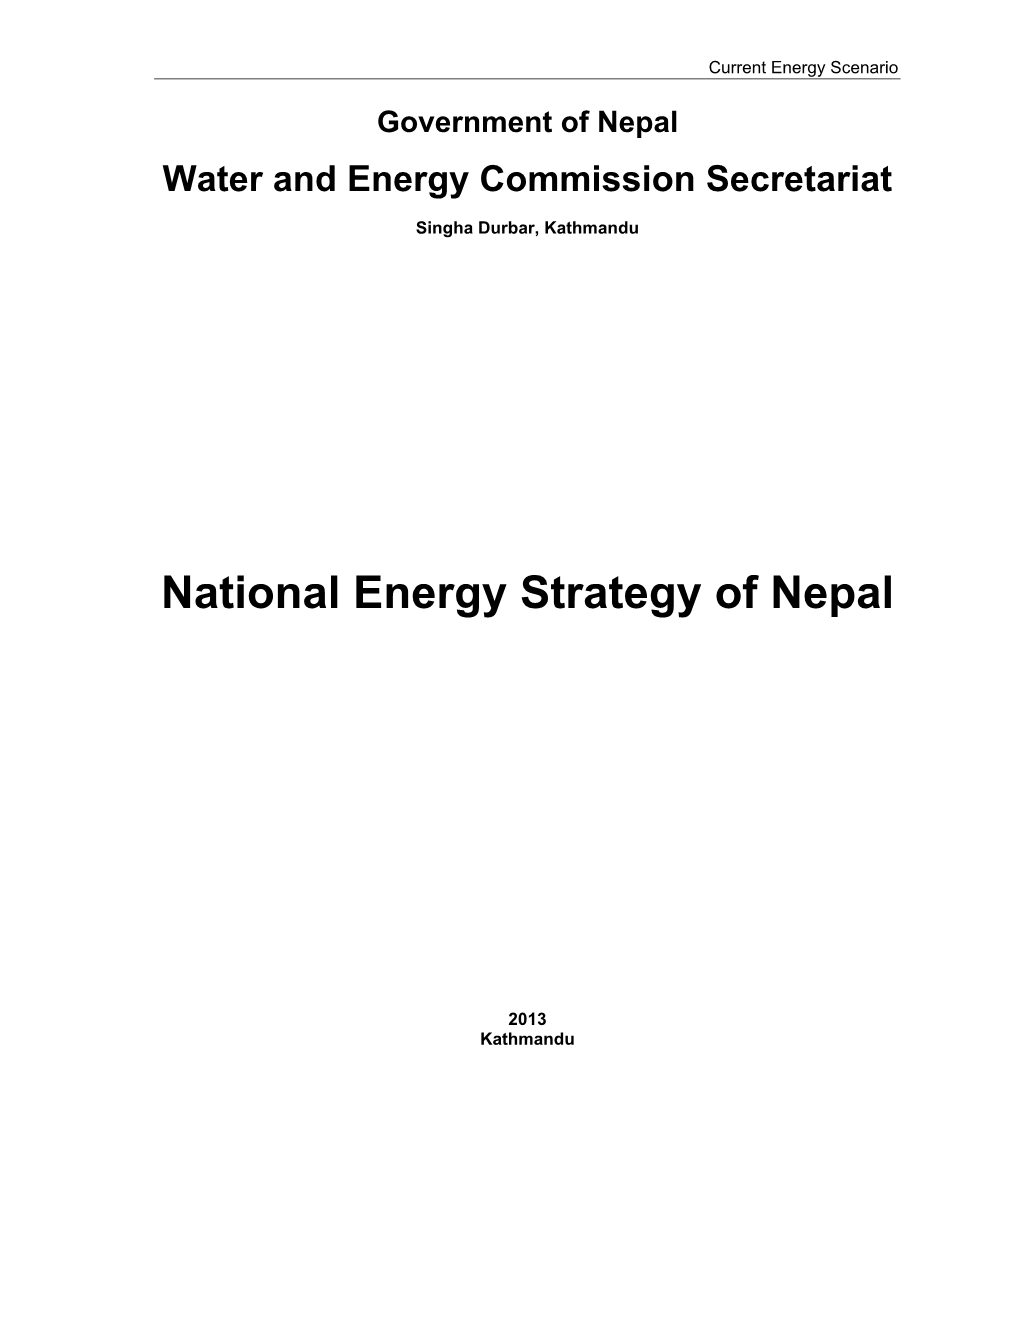 National Energy Strategy of Nepal 2013